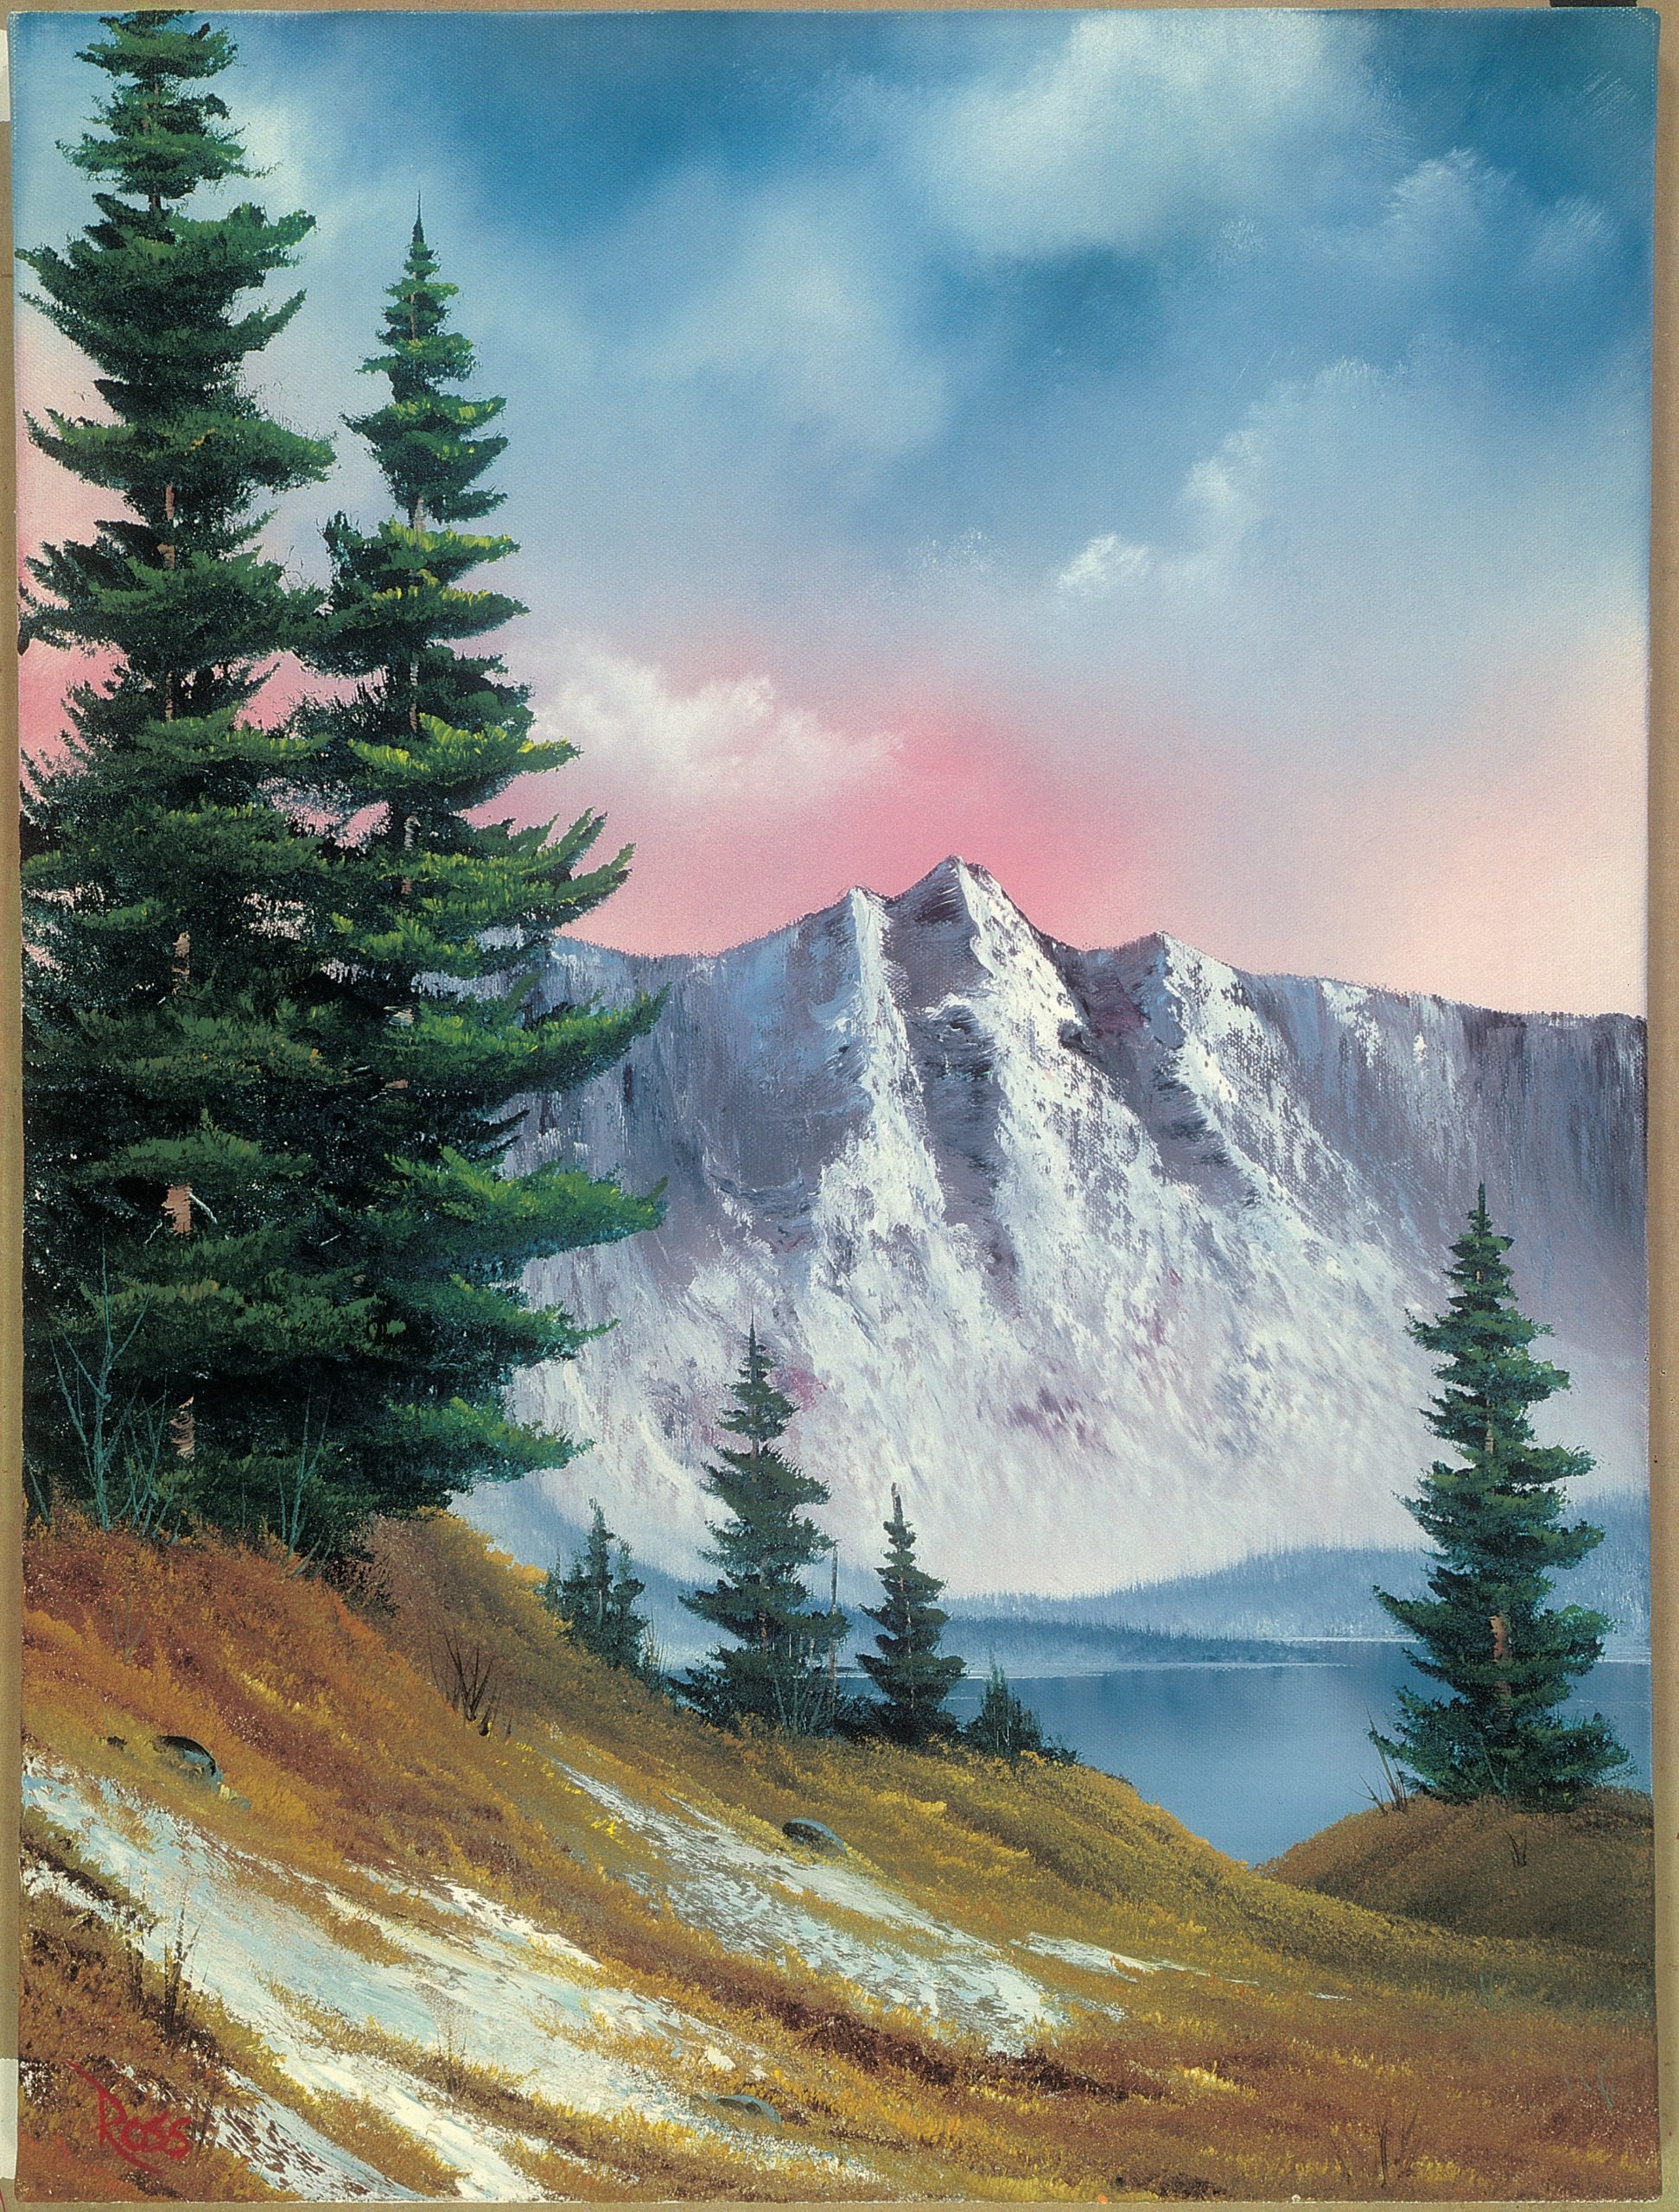 The largest collection of Ross’ paintings to ever be displayed at one time will be shown in the Franklin Park Arts Center in Purcellville, Virginia. Courtesy of Bob Ross Inc.